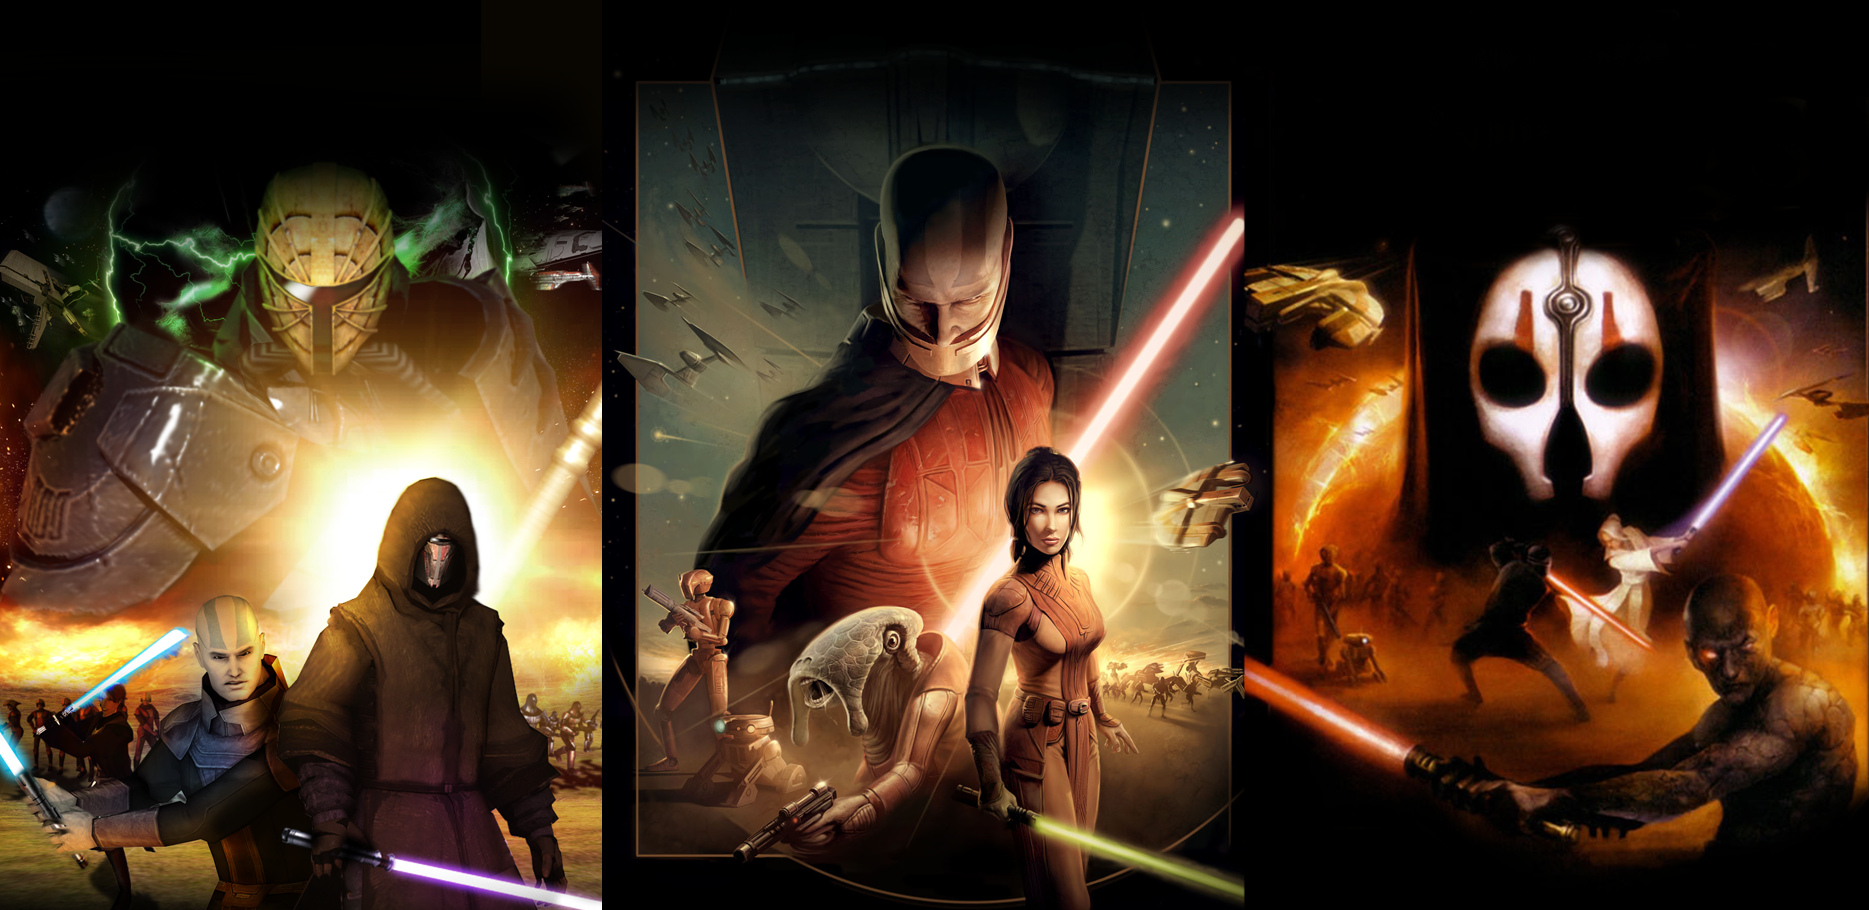 Star wars knight of the old republic 2 русификатор steam фото 103